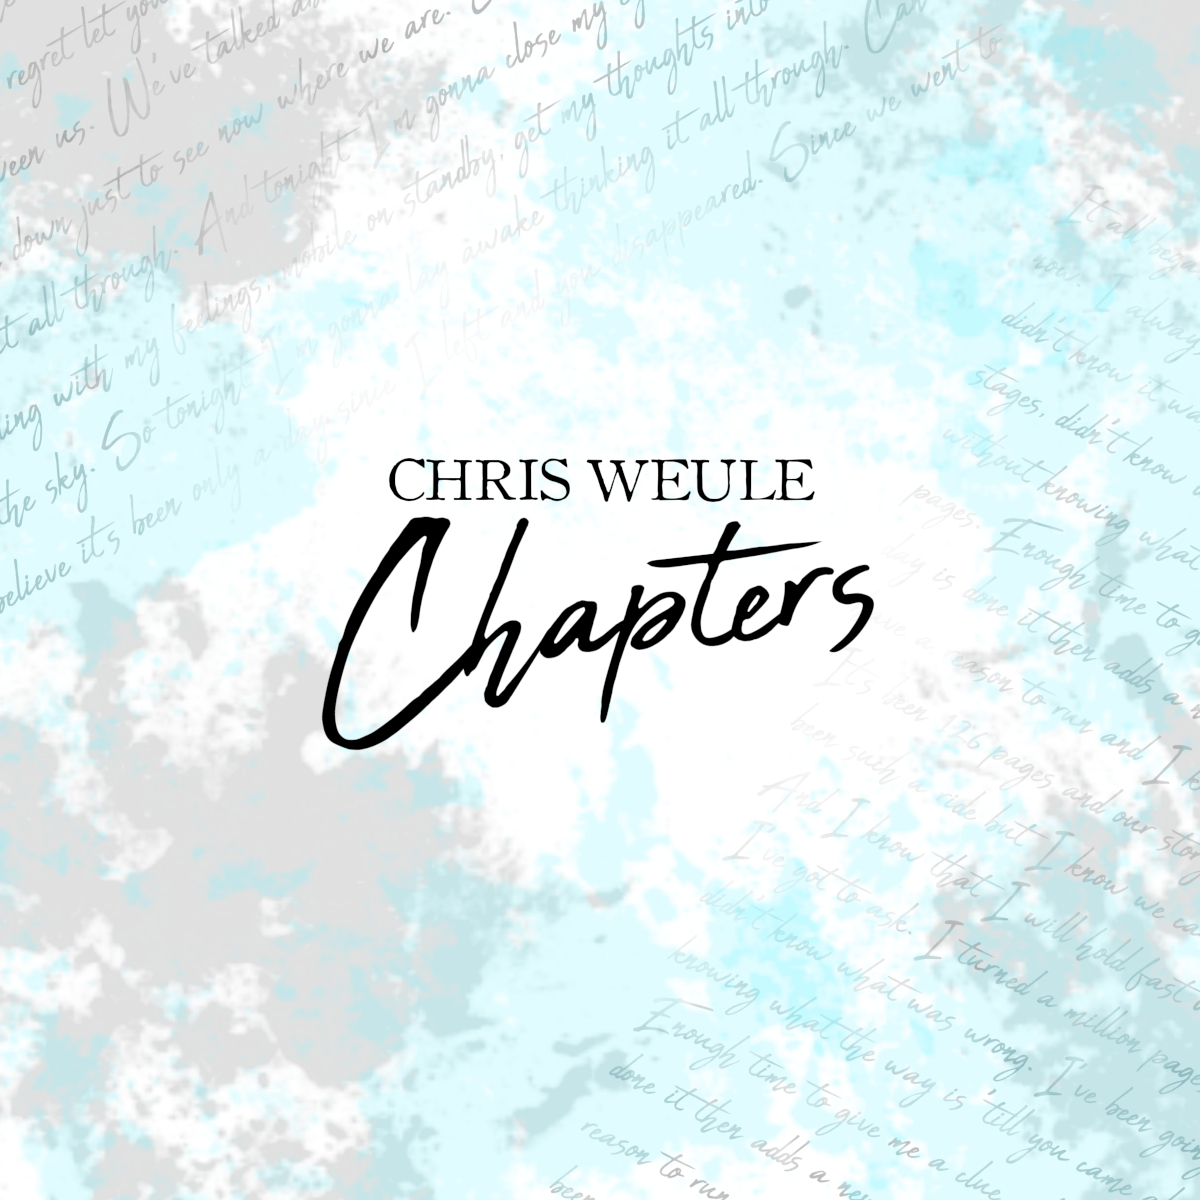 Chris_Weule_Chapters_Cover